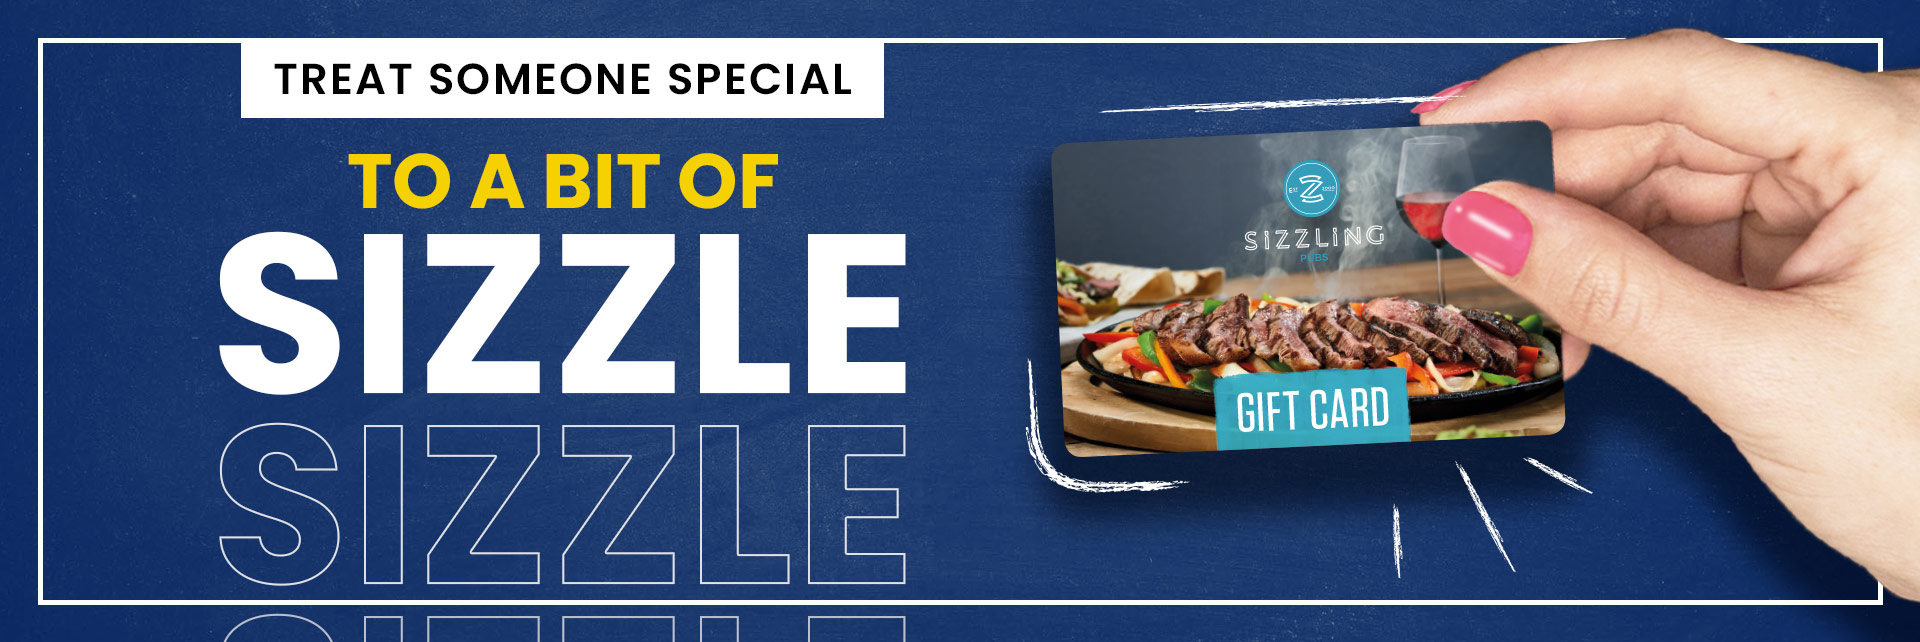 Sizzling Pubs Gift Card at The Crofter's Arms in Liverpool